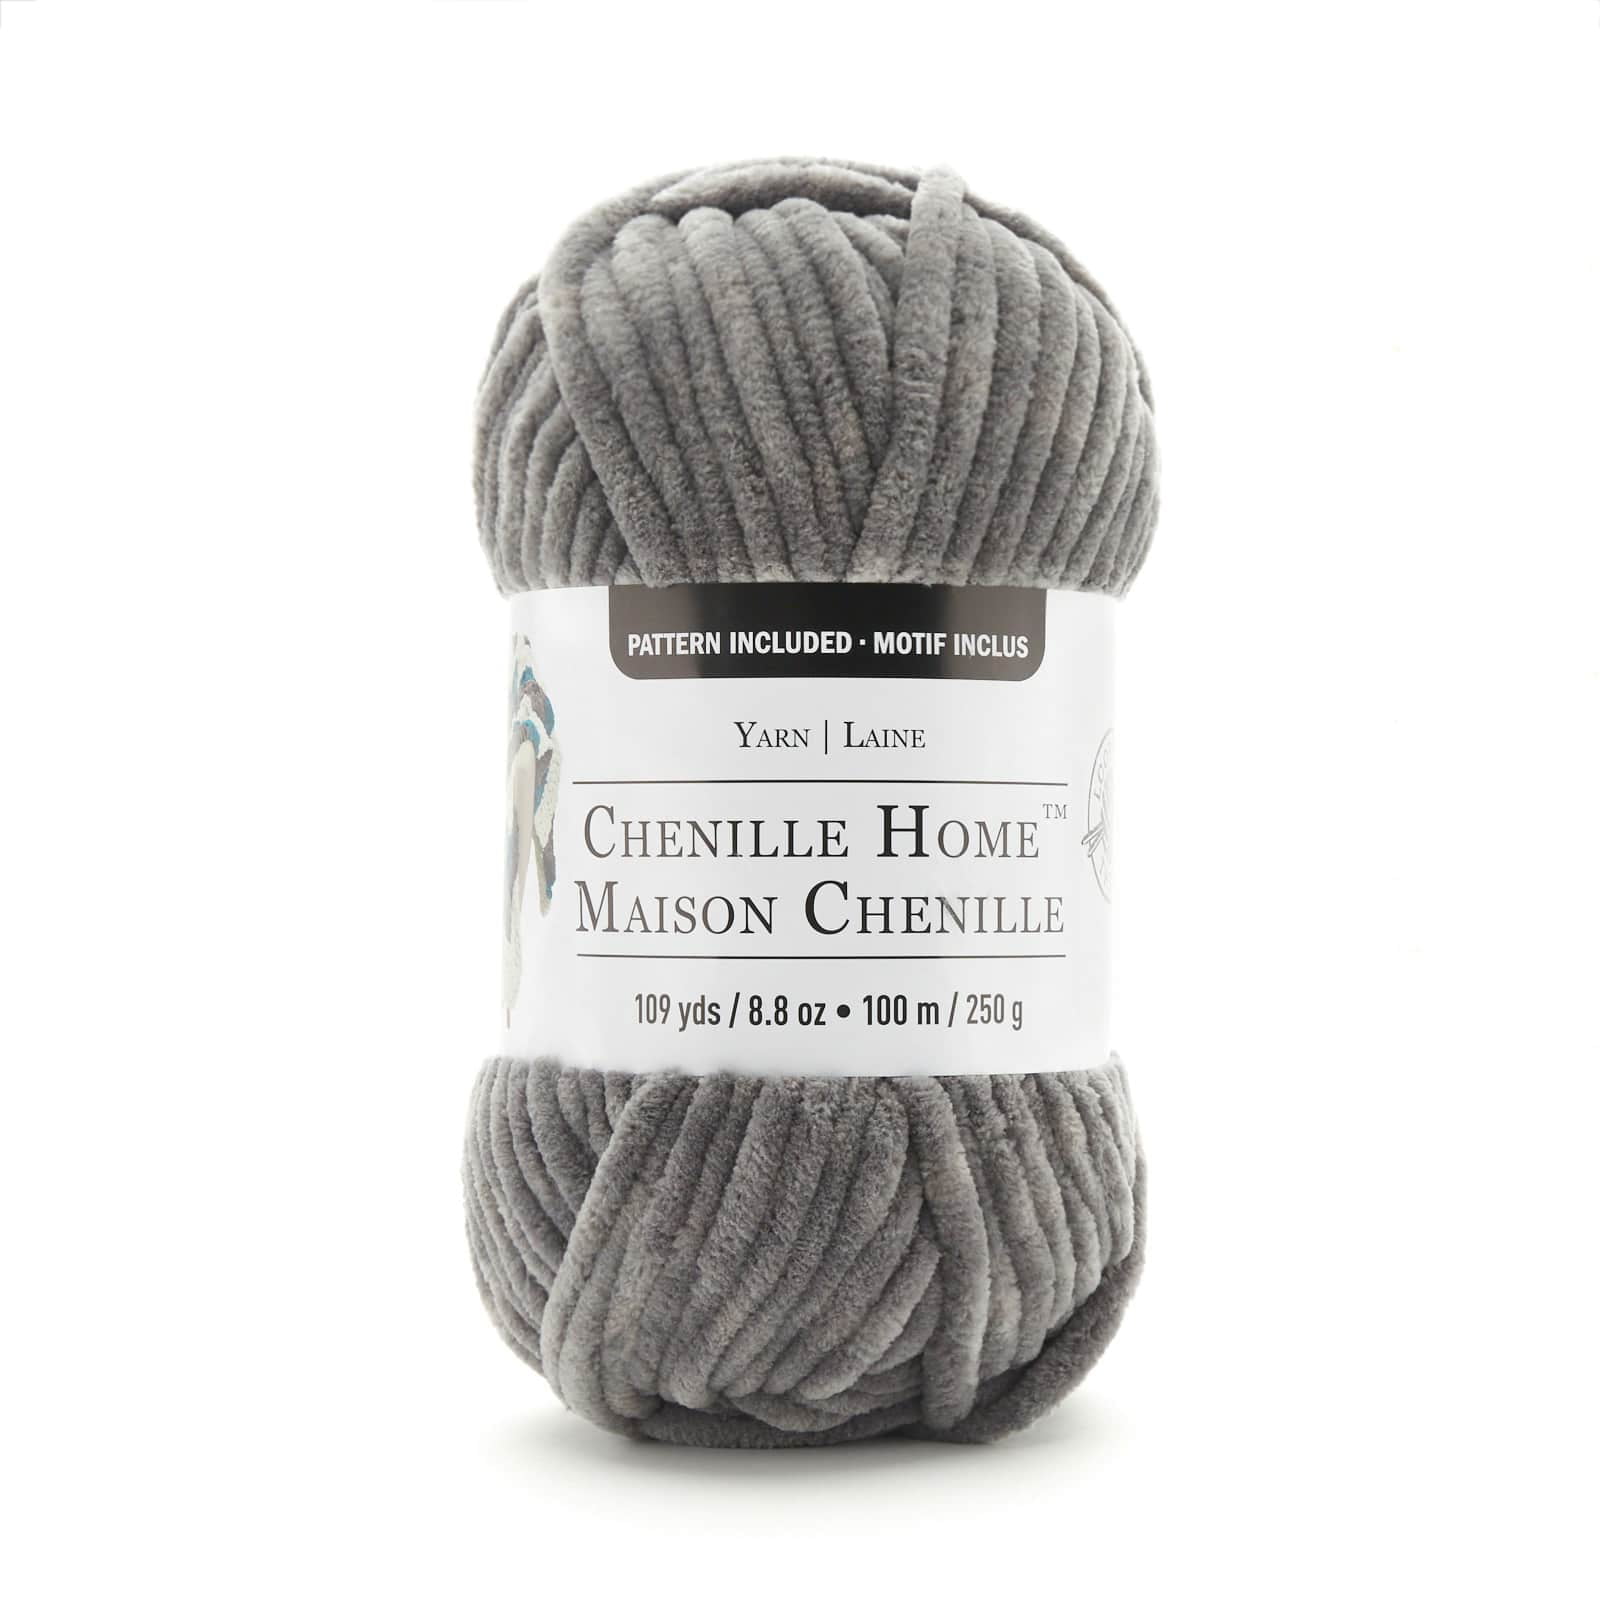 Ragged Life Blog  Chenille Yarn - Buy it Hot from the Mills